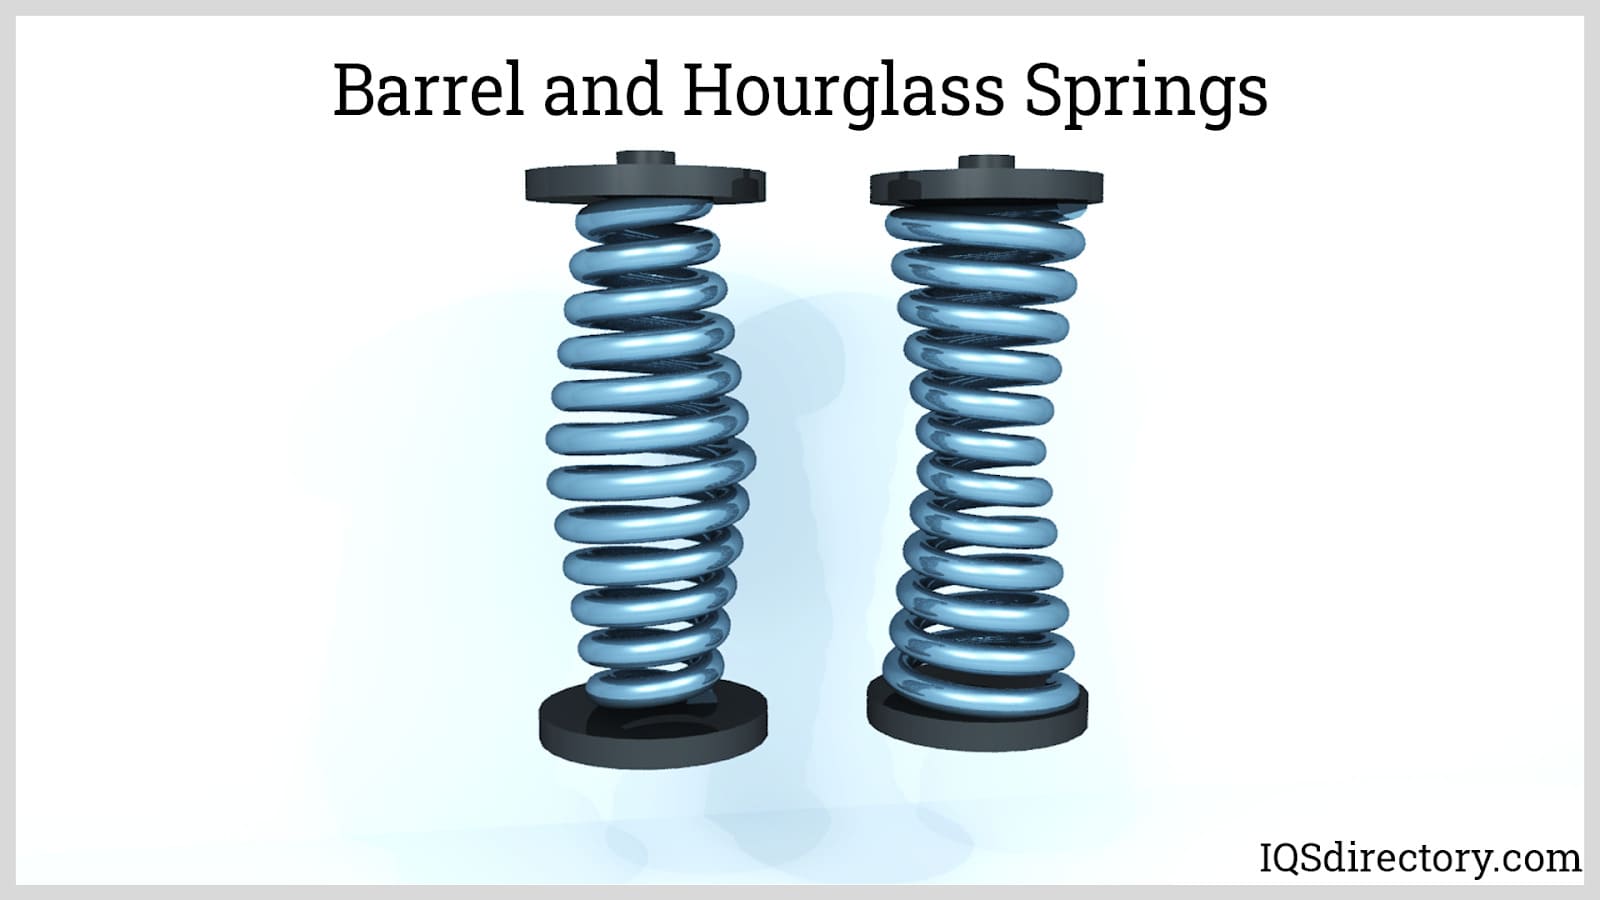 Barrel and Hourglass Springs